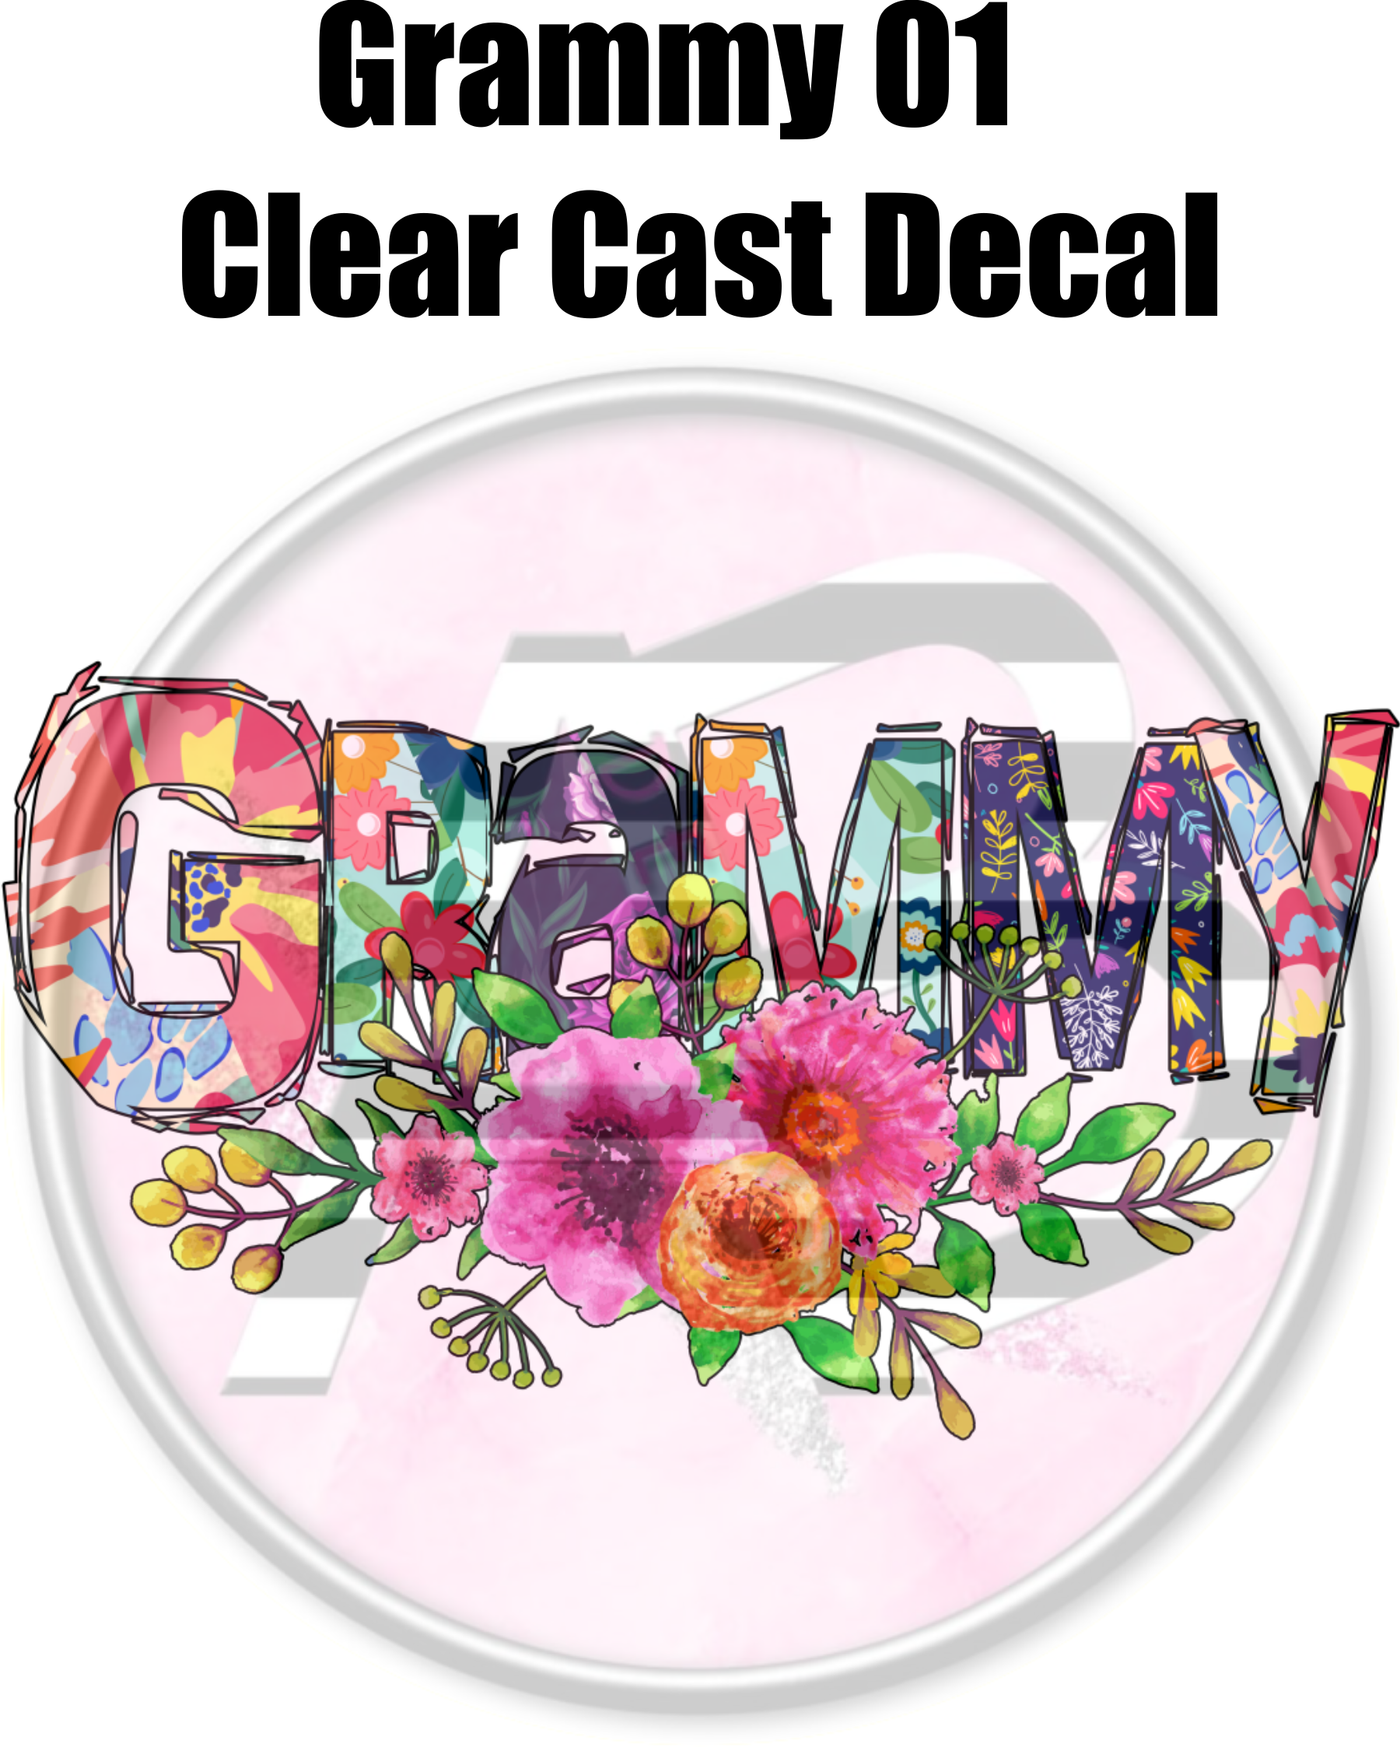 Grammy 01 - Clear Cast Decal